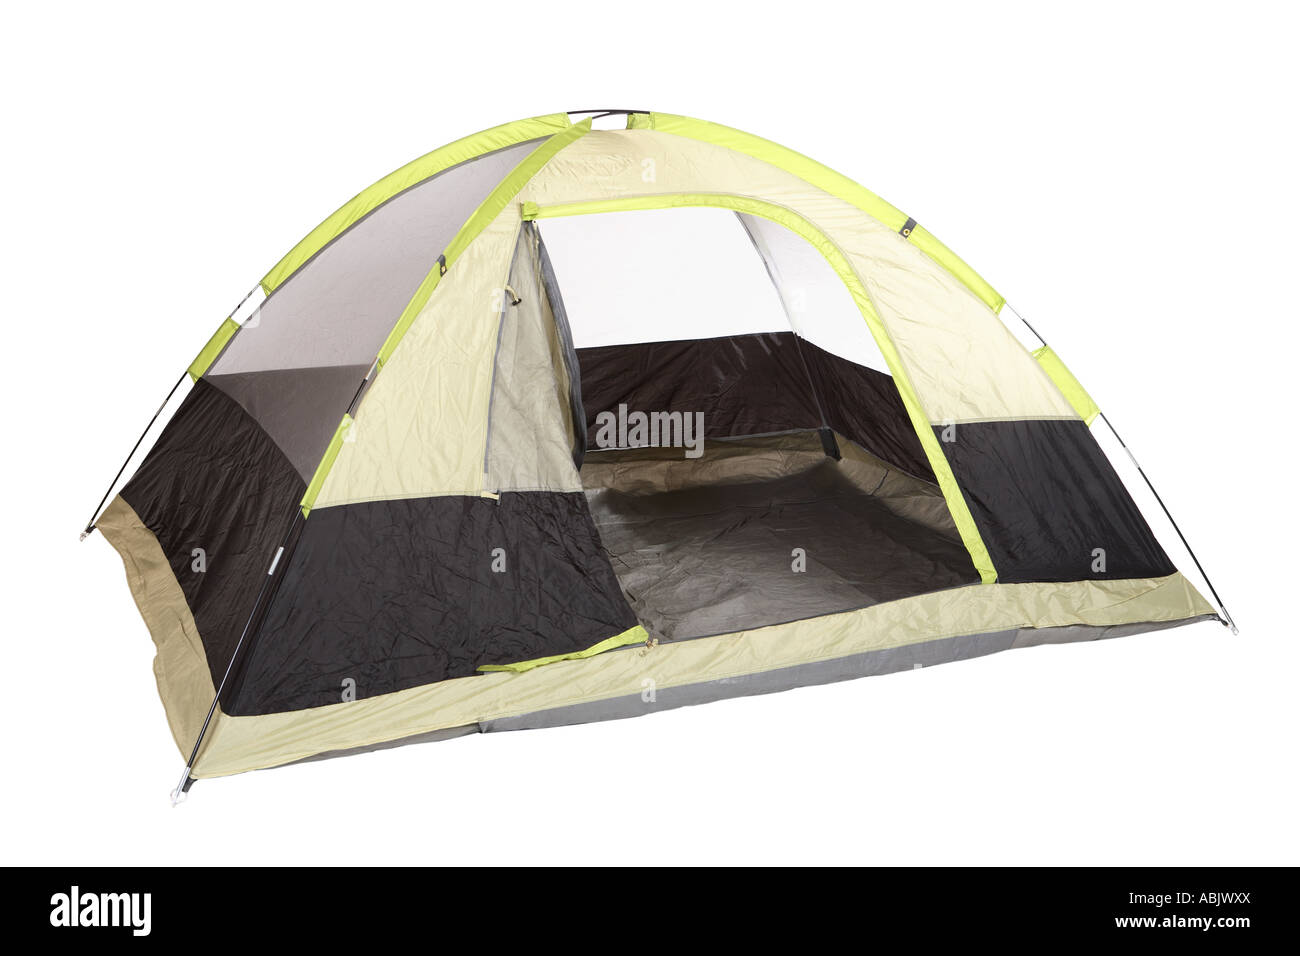 Camping tent cut out on white background Stock Photo